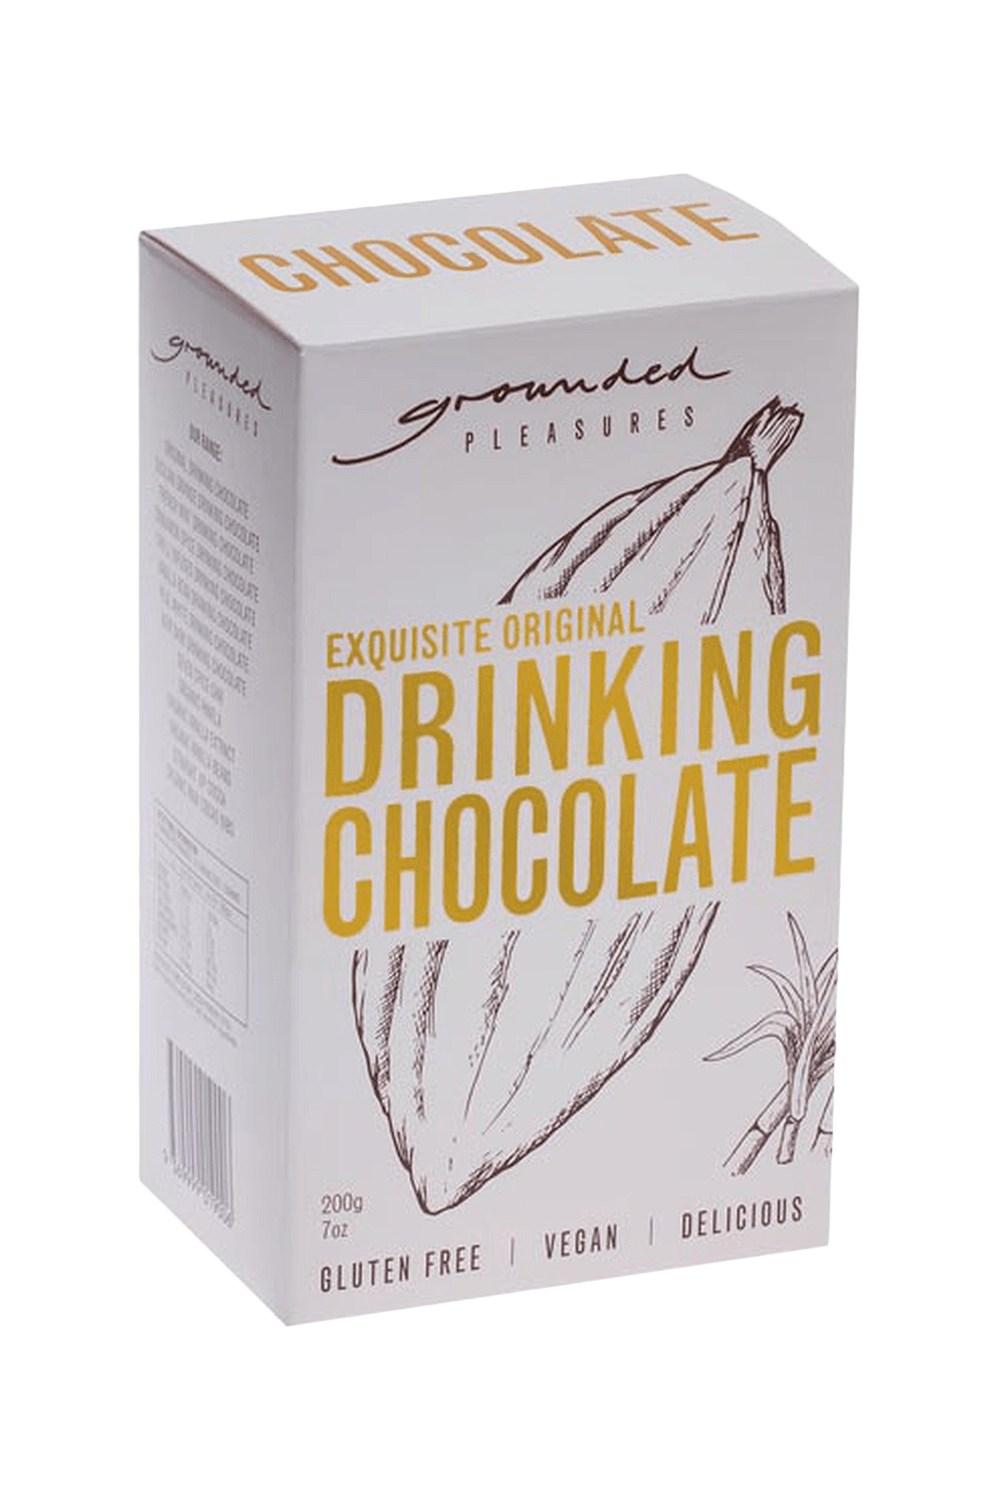 buy cafe products grounded pleasures drinking chocolate drinking chocolate